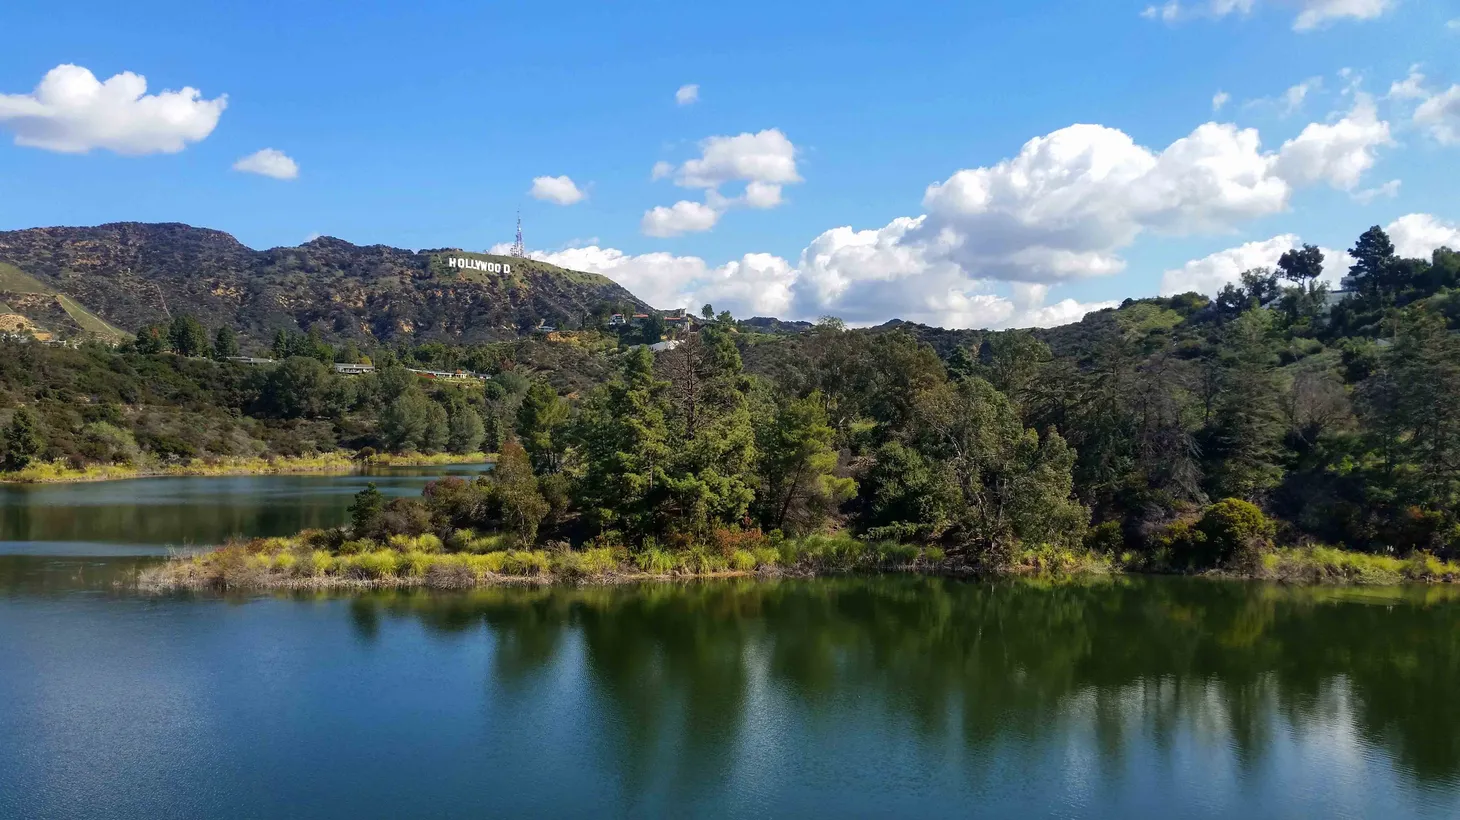 Looking for a summer hike? Modern Hiker’s Casey Schreiner shares his favorites, including the Hollywood Reservoir trail.